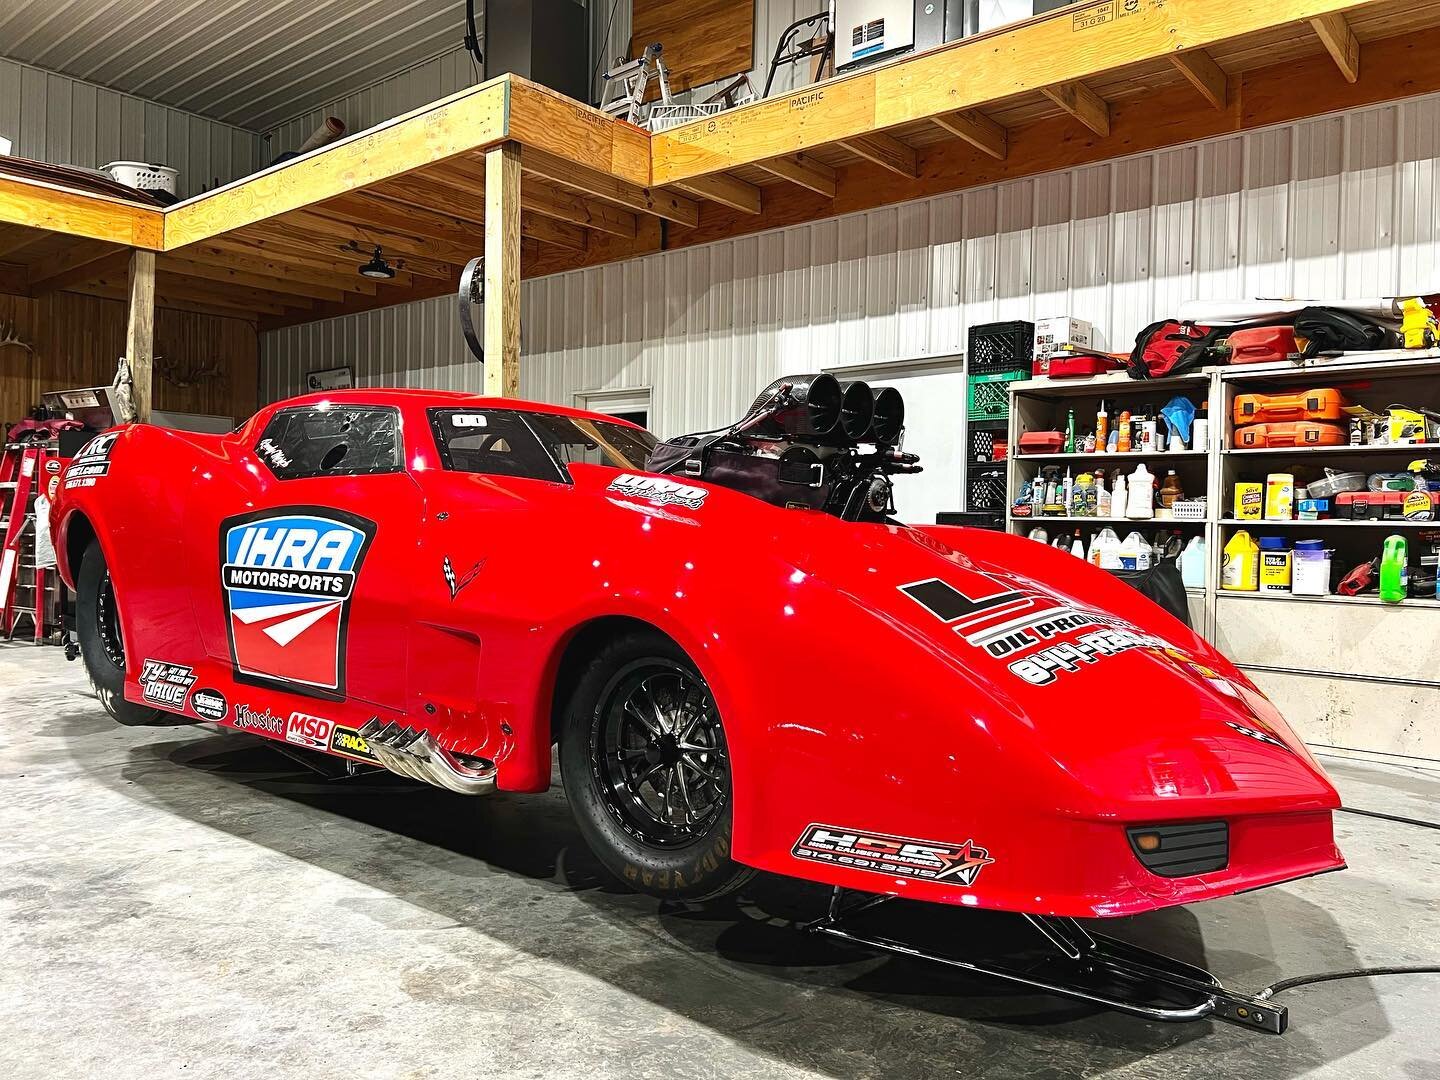 When your &ldquo;Deer Farming&rdquo; mentor just happens to also be the NMCA Extreme Pro Mod World Champion you get to see some pretty awesome stuff on your visits! Thank you Randy Merick (@gemberlingmerick )for the John Deere tech support, help sour